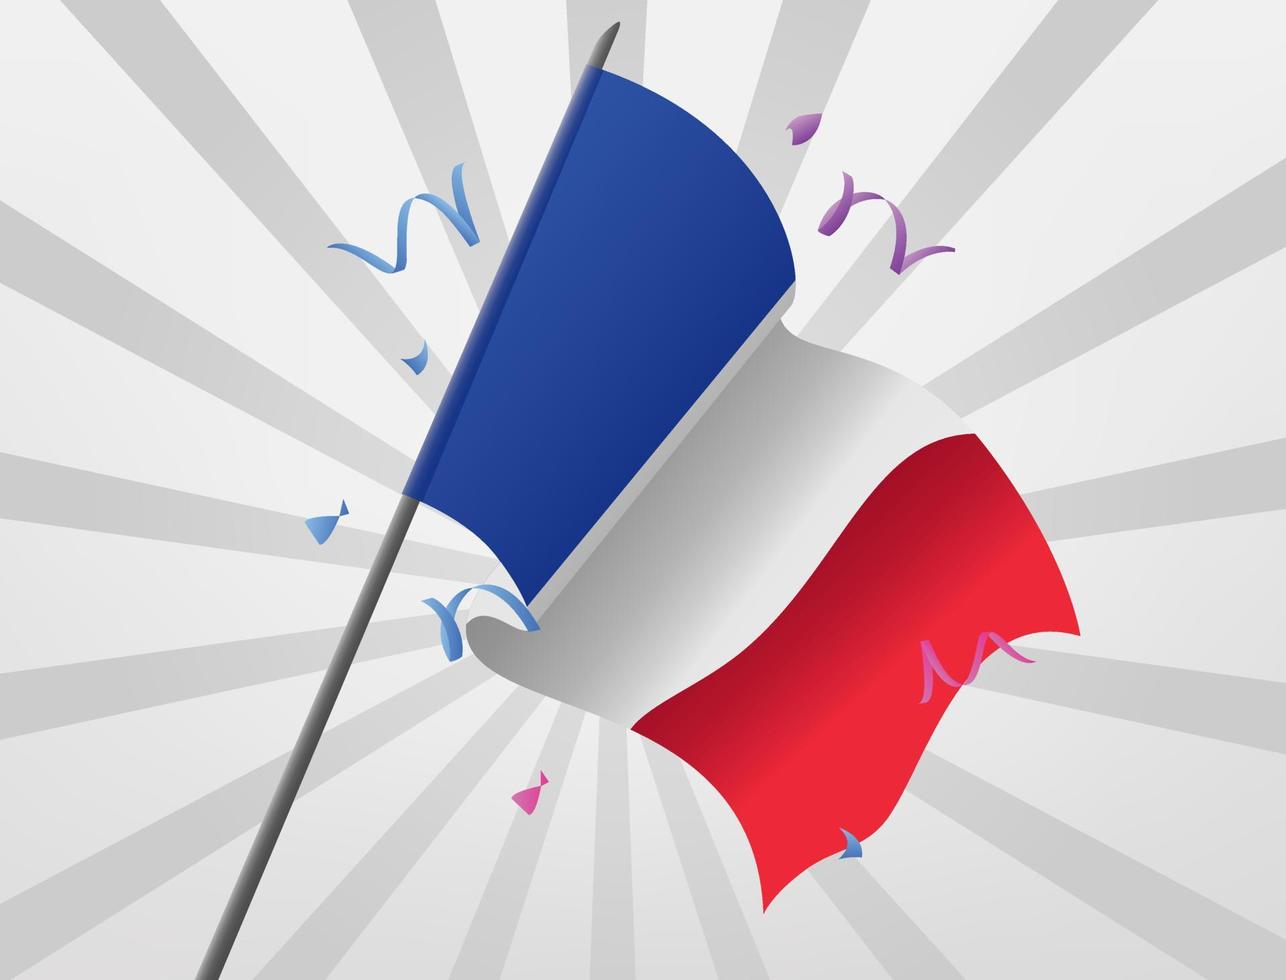 The flag of French celebrations flew at high heights vector